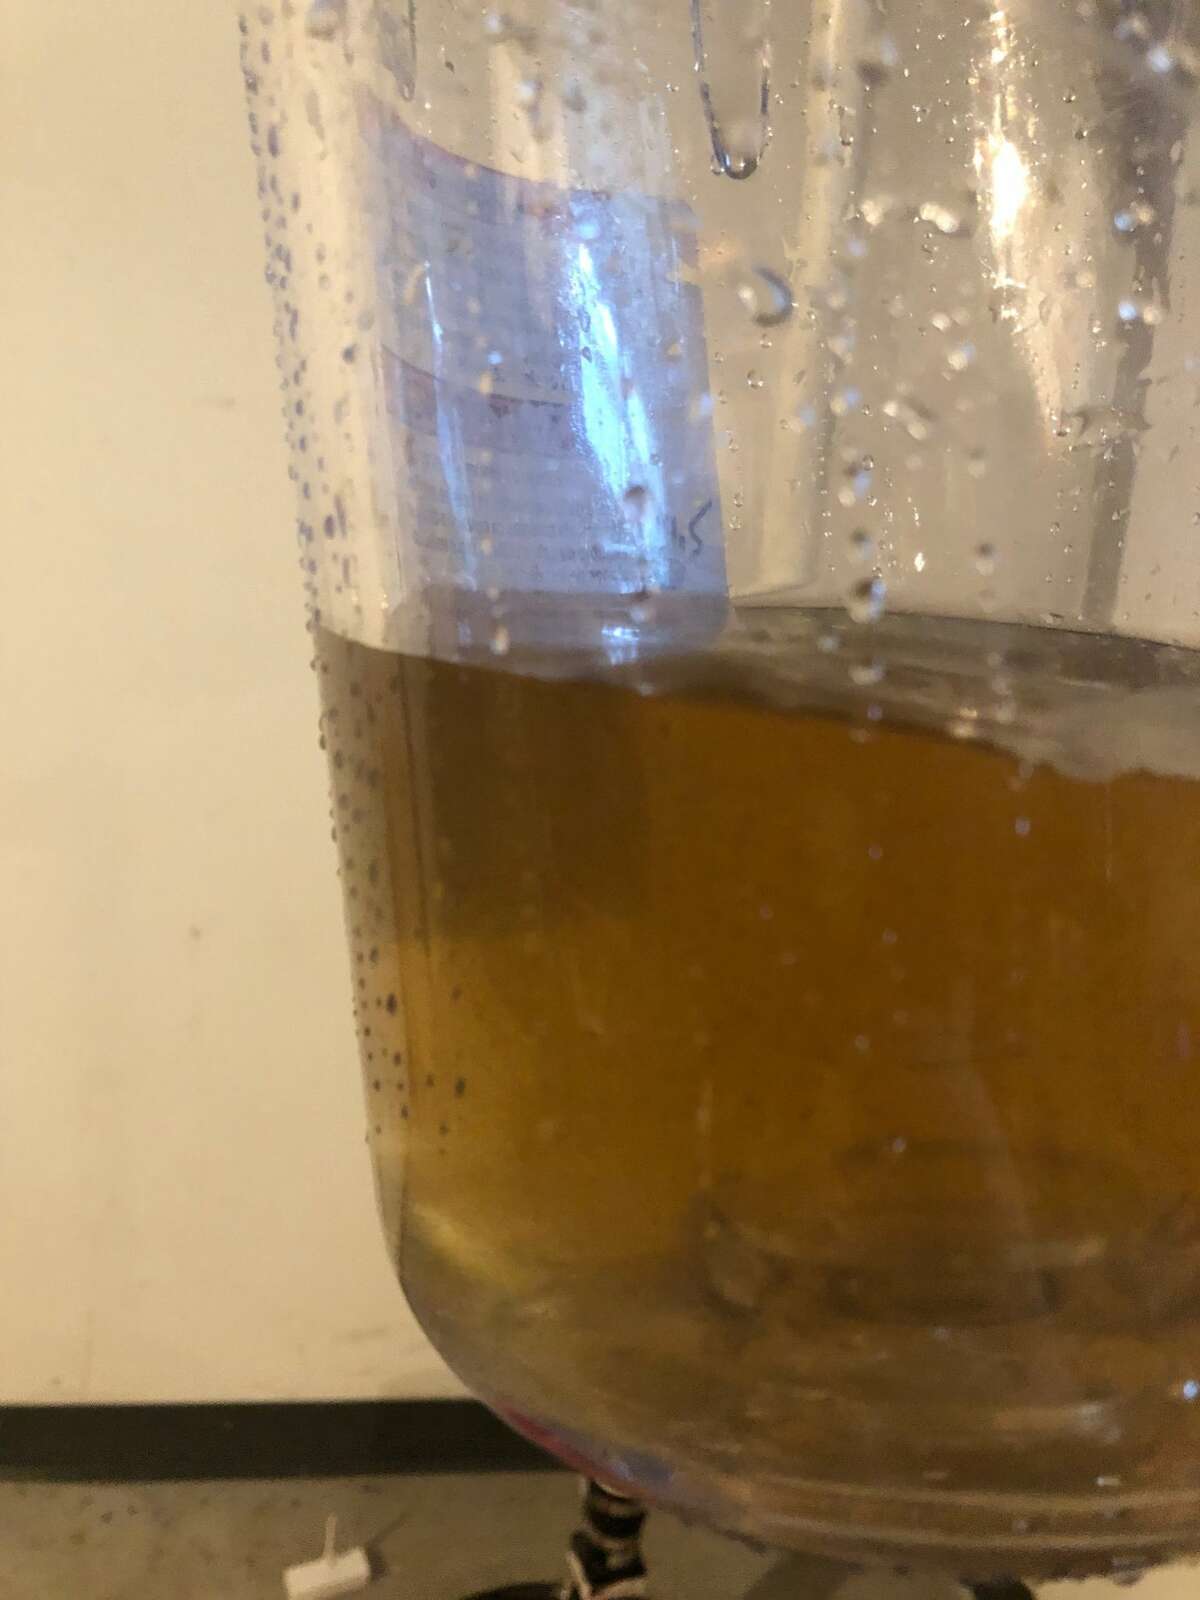 City-supplied water from the tap at a home on Saddle Brook Drive, a development on the eastern plateau of Saratoga Springs, where water tests revealed high lead levels and excessive turbidity. (Provided photo)